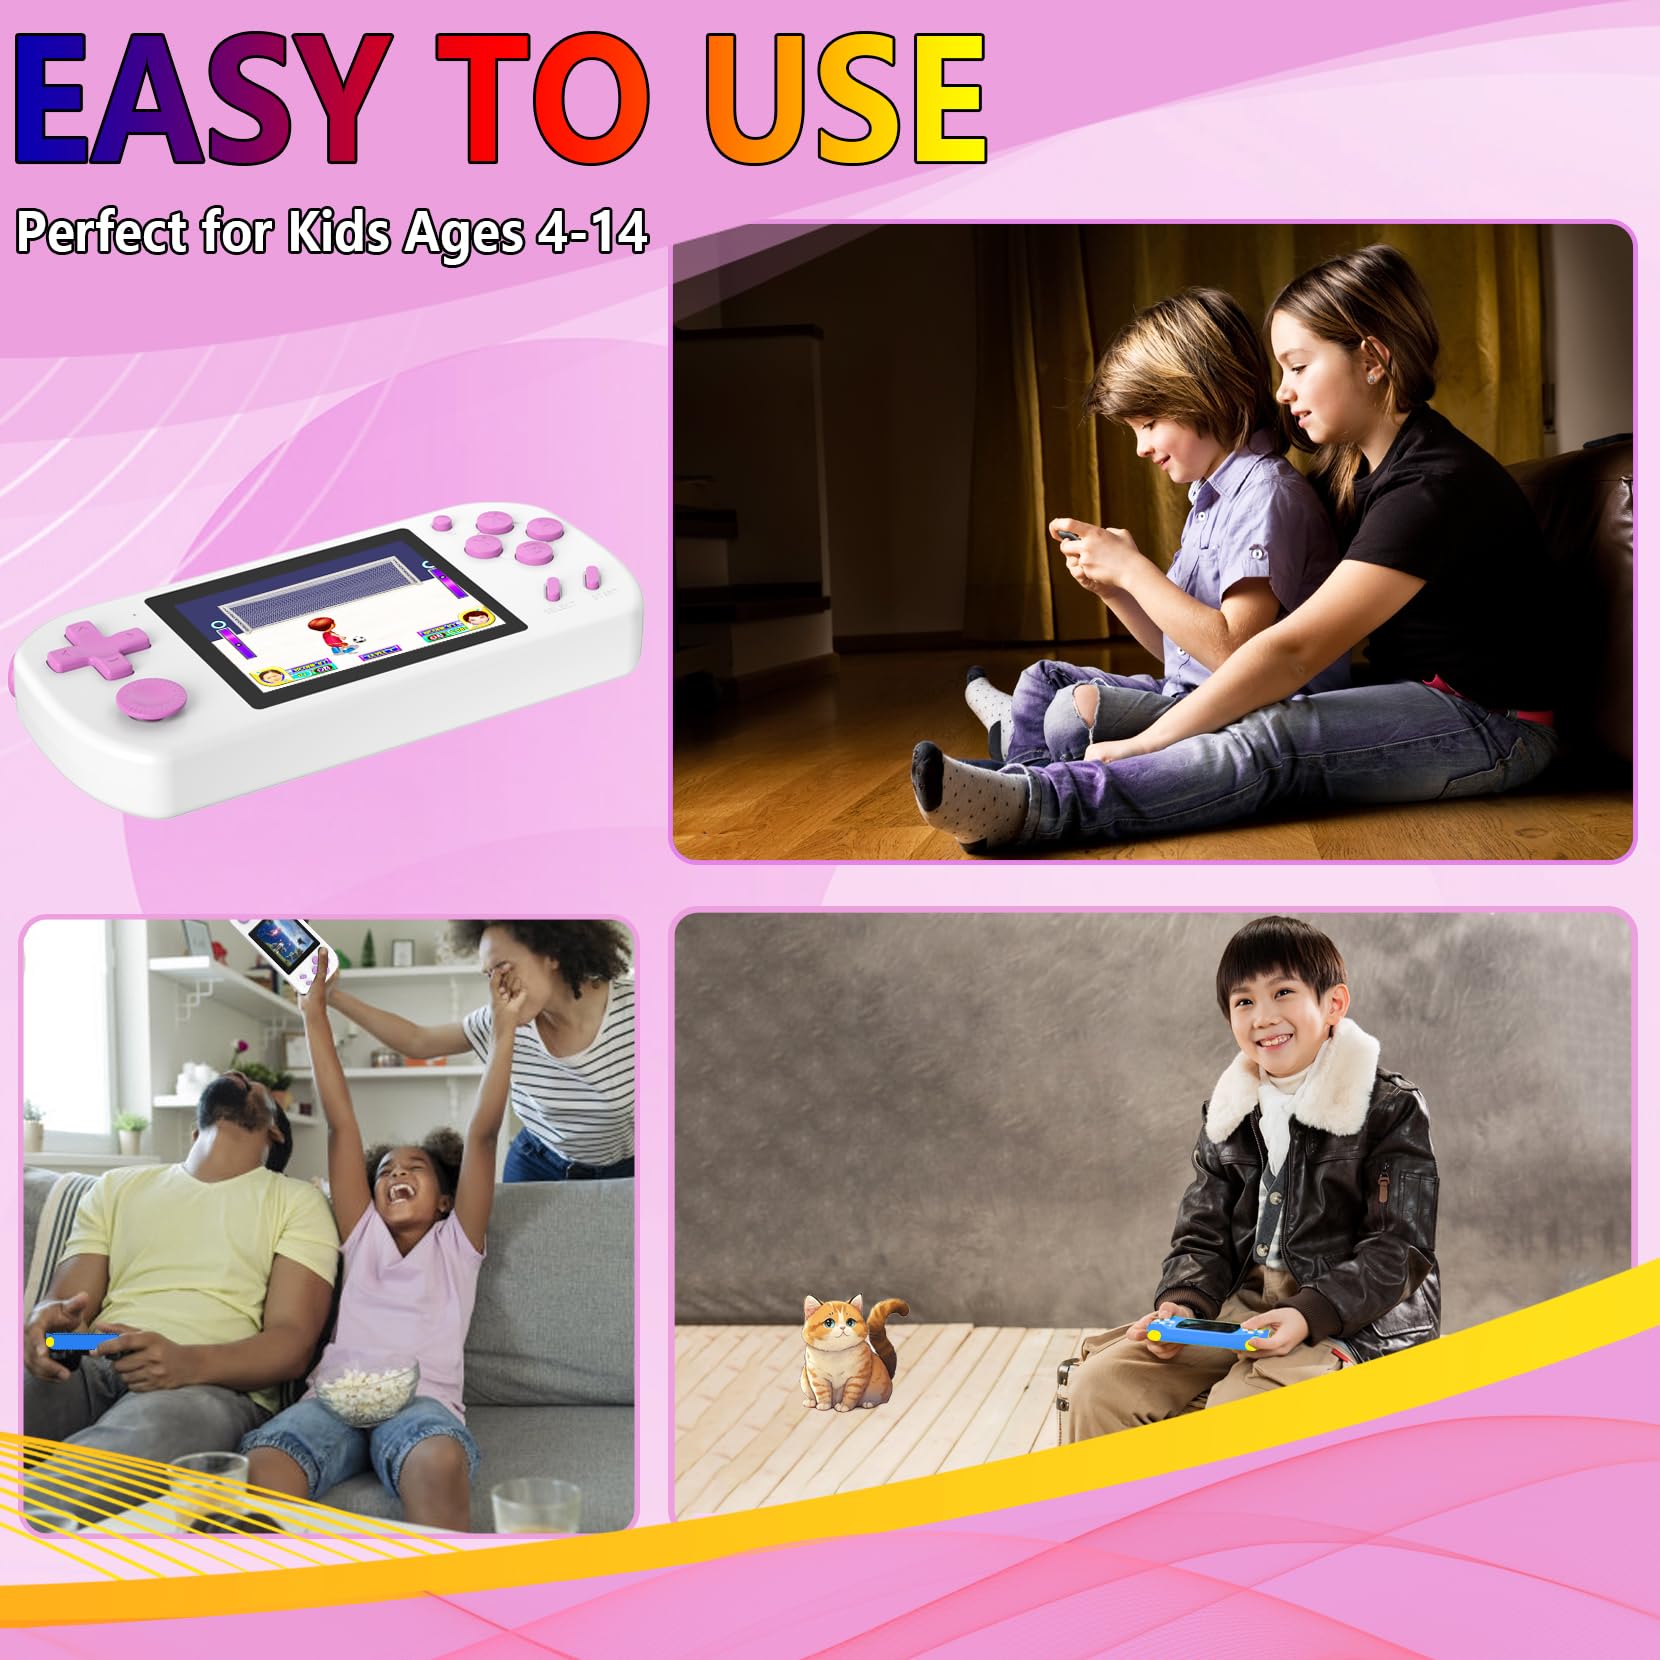 TEBIYOU Handheld Game Console for Kids Preloaded 218 Retro Video Games, Portable Gaming Player with Rechargeable Battery 3.0